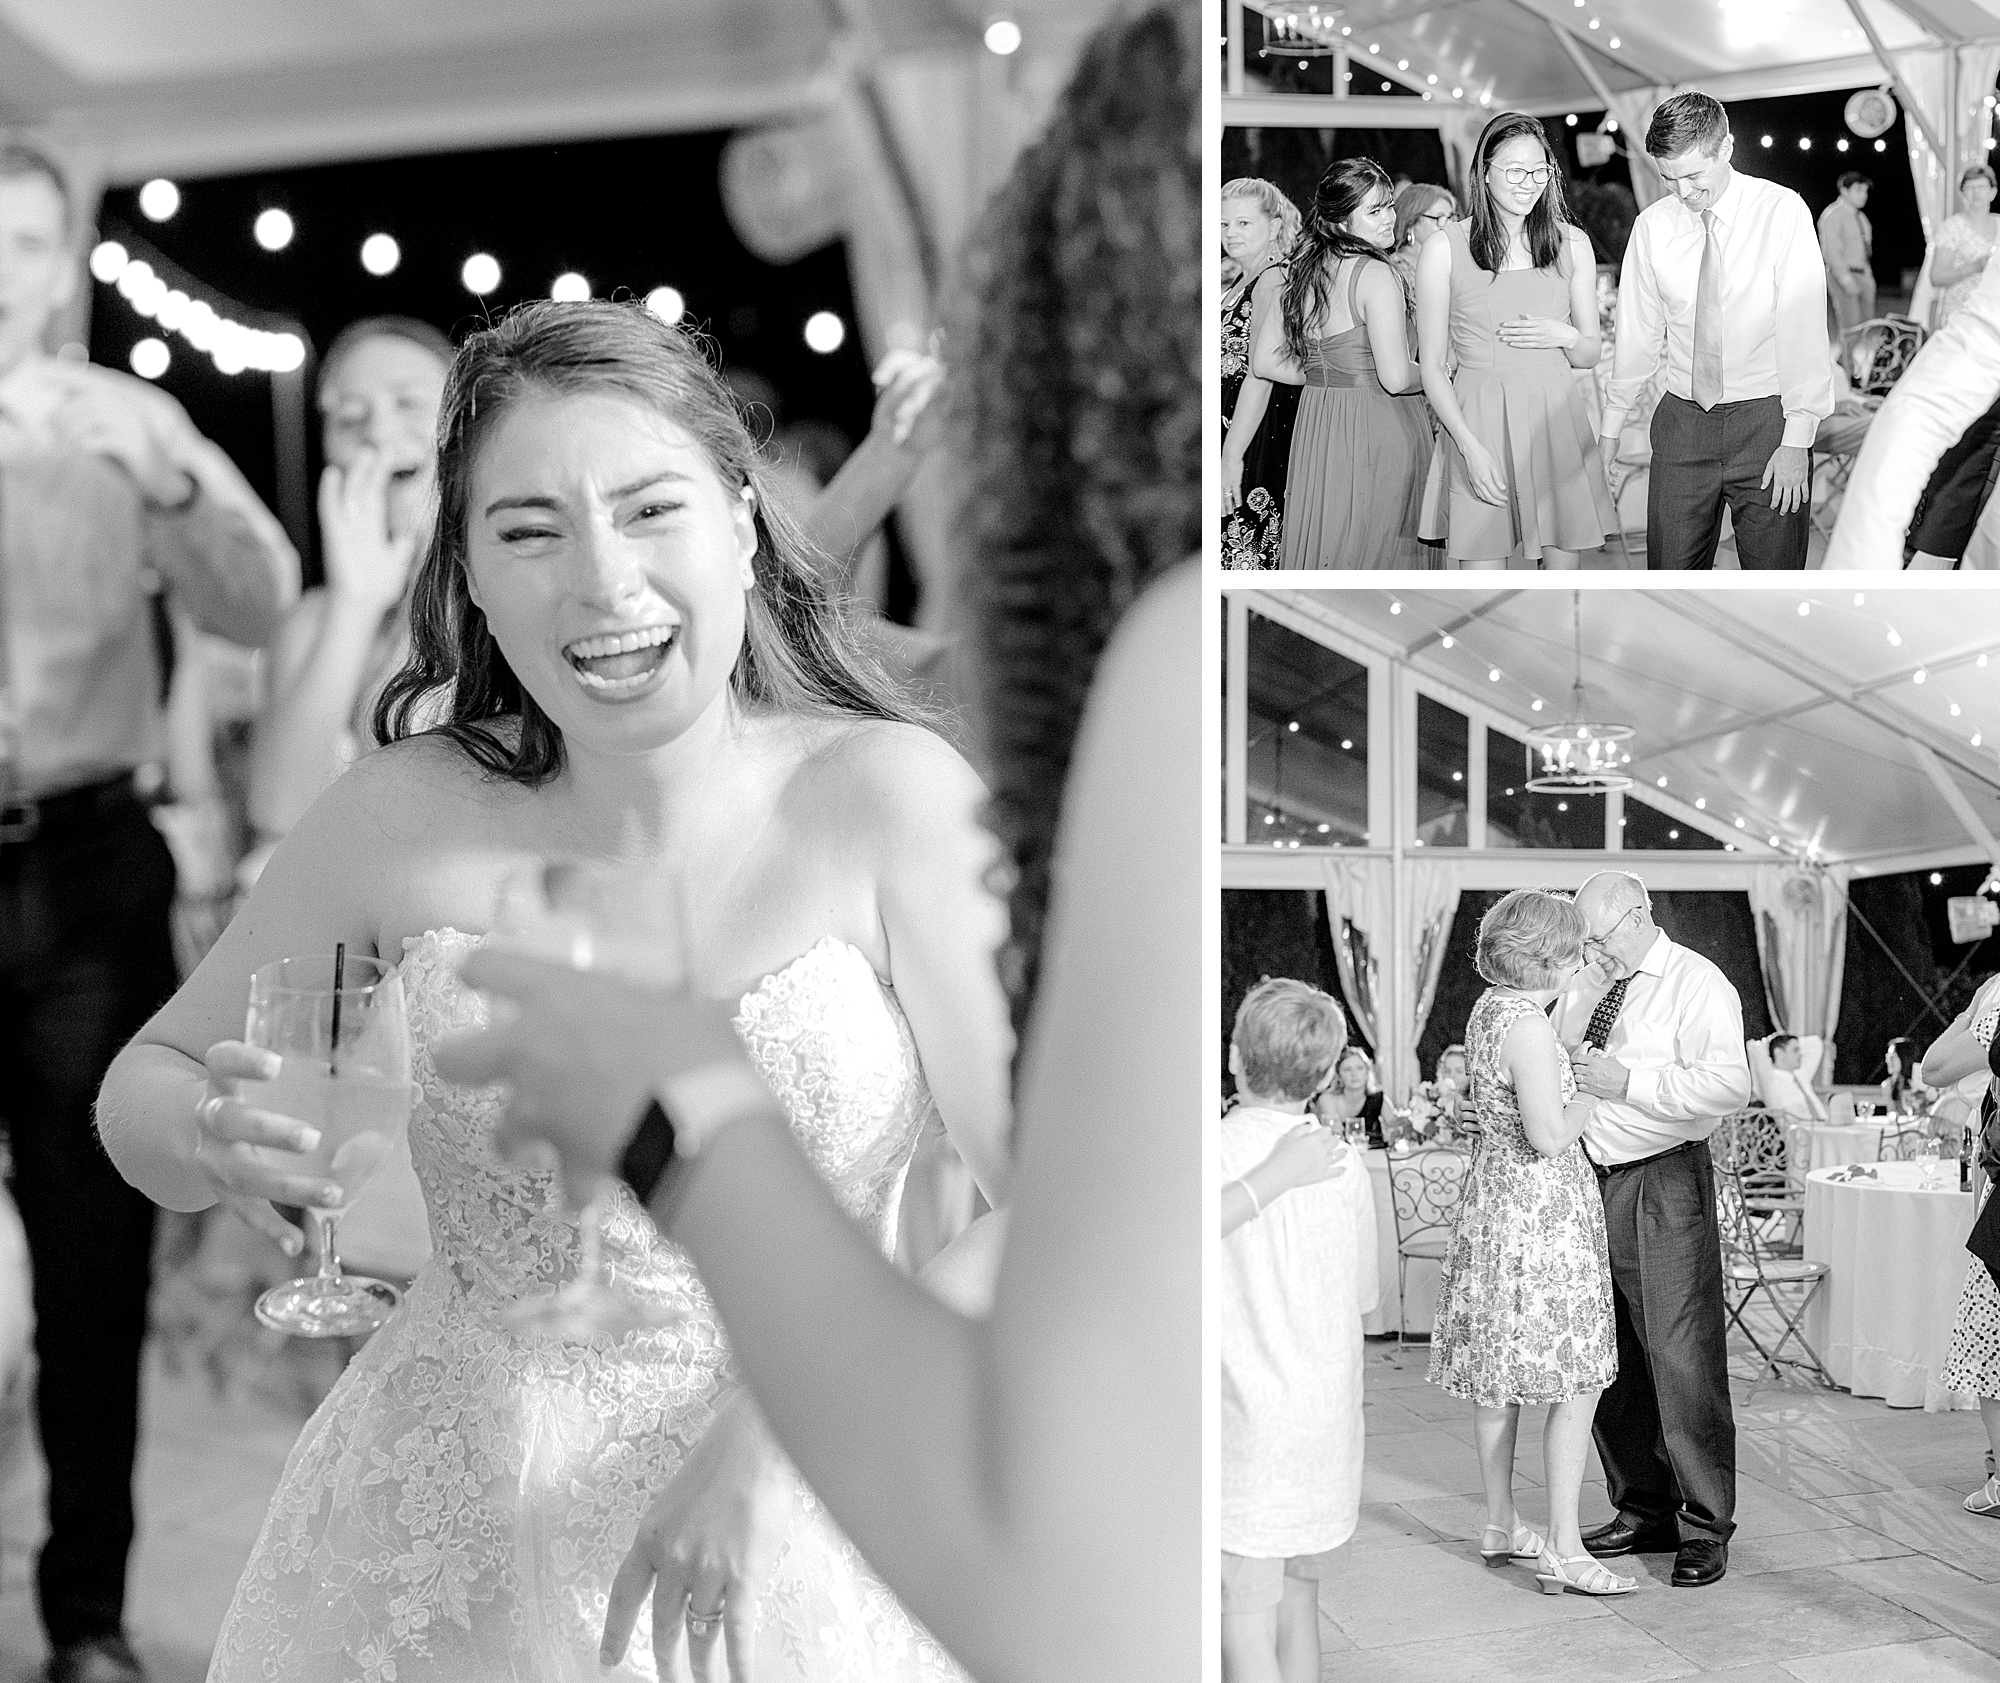 Black and white photos of reception photos under a open air tent.